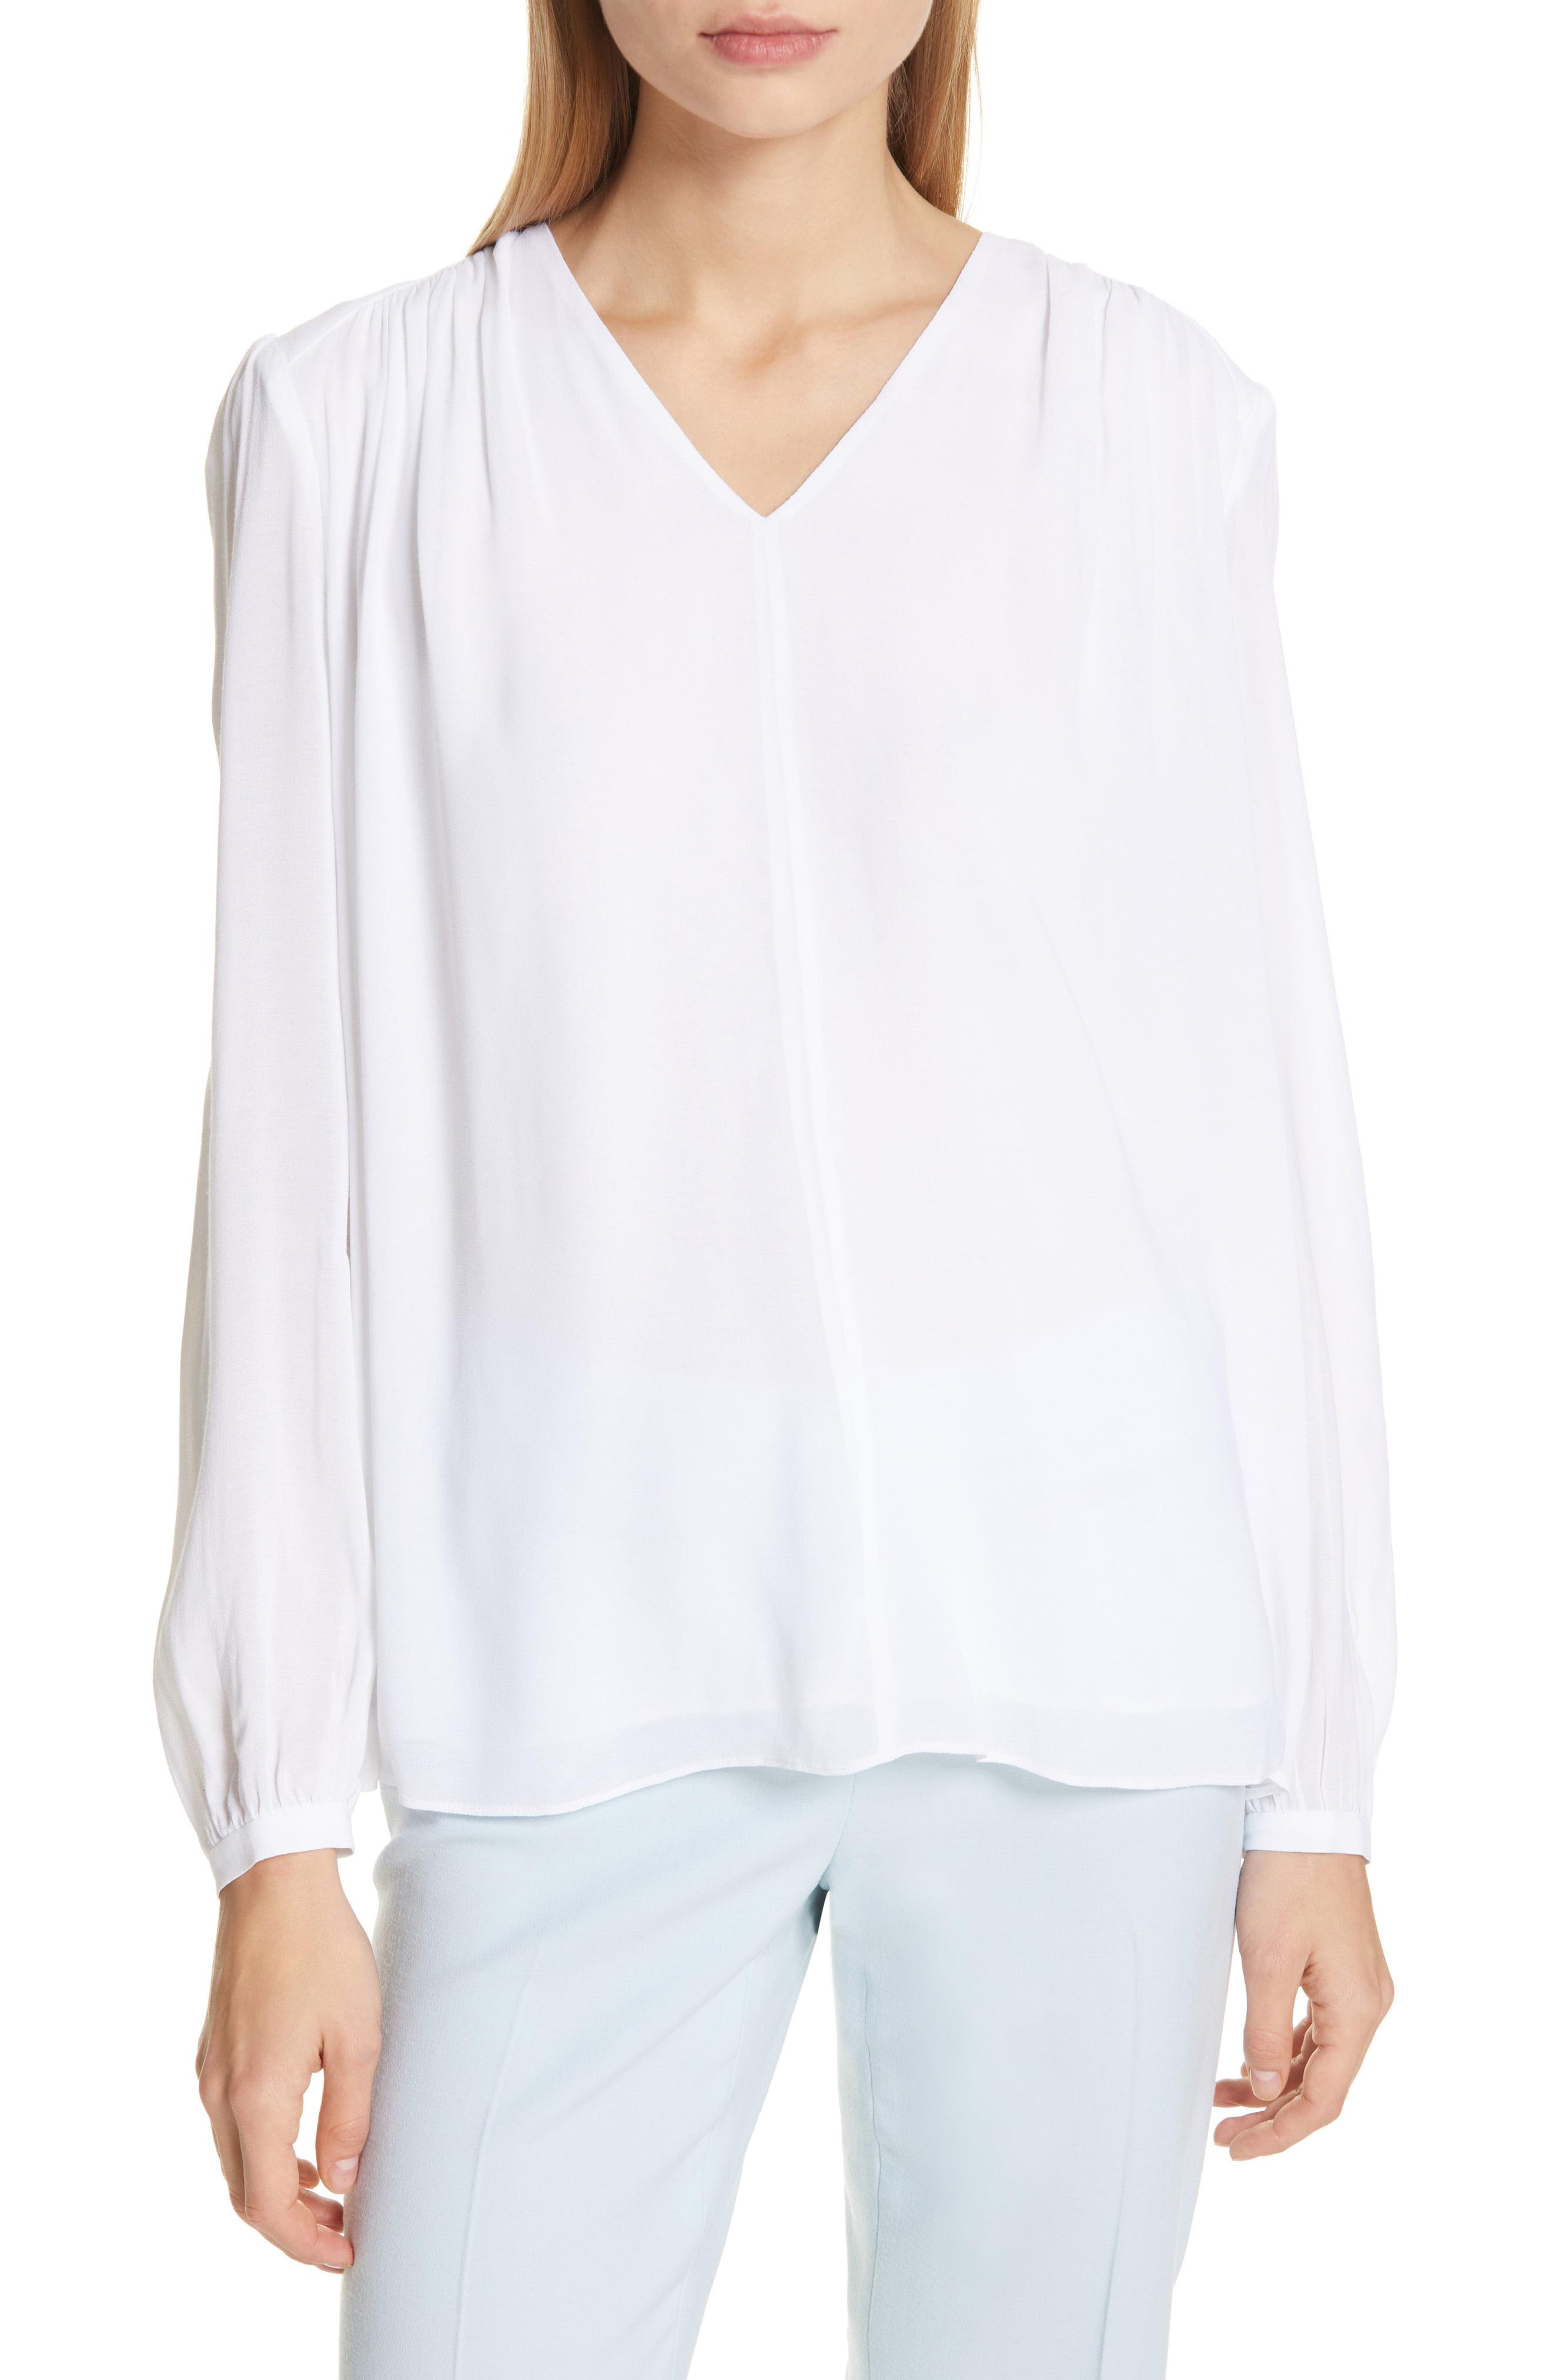 Lyst - LEWIT Shirred Blouse in White